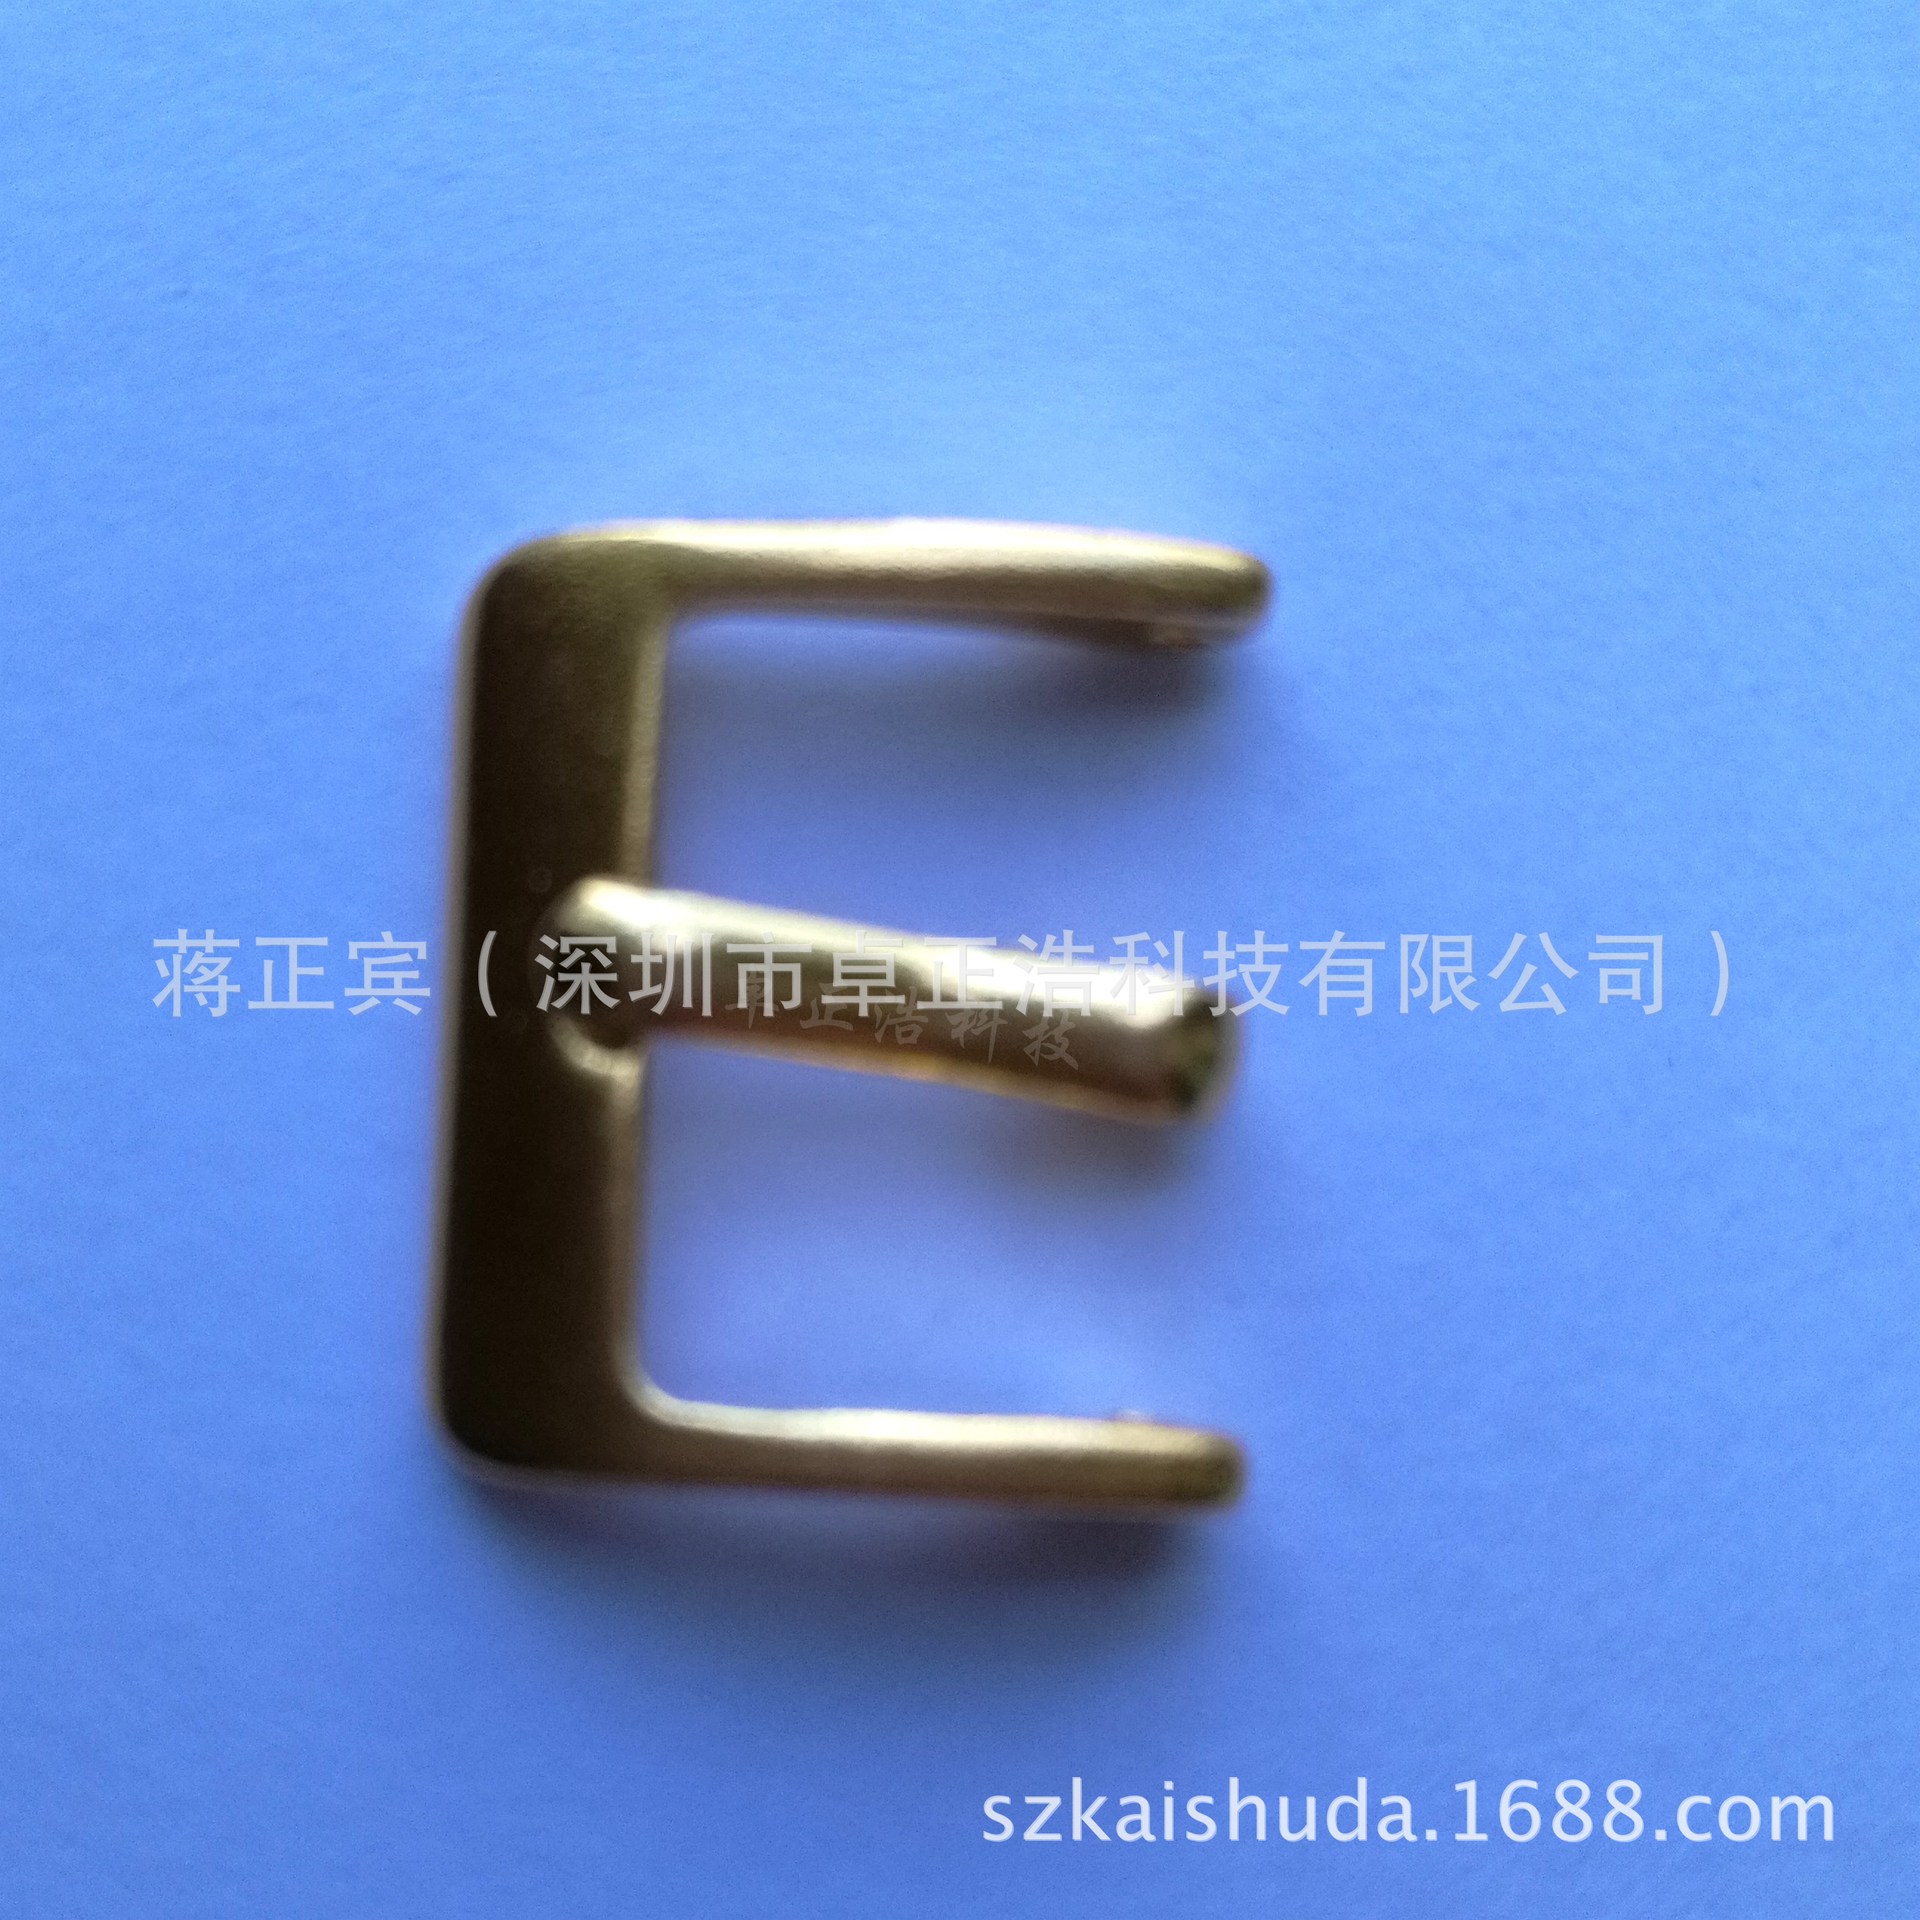 factory Produce stainless steel Buckle Leather buckle Luggage deduction Pin buckle clocks and watches hardware parts